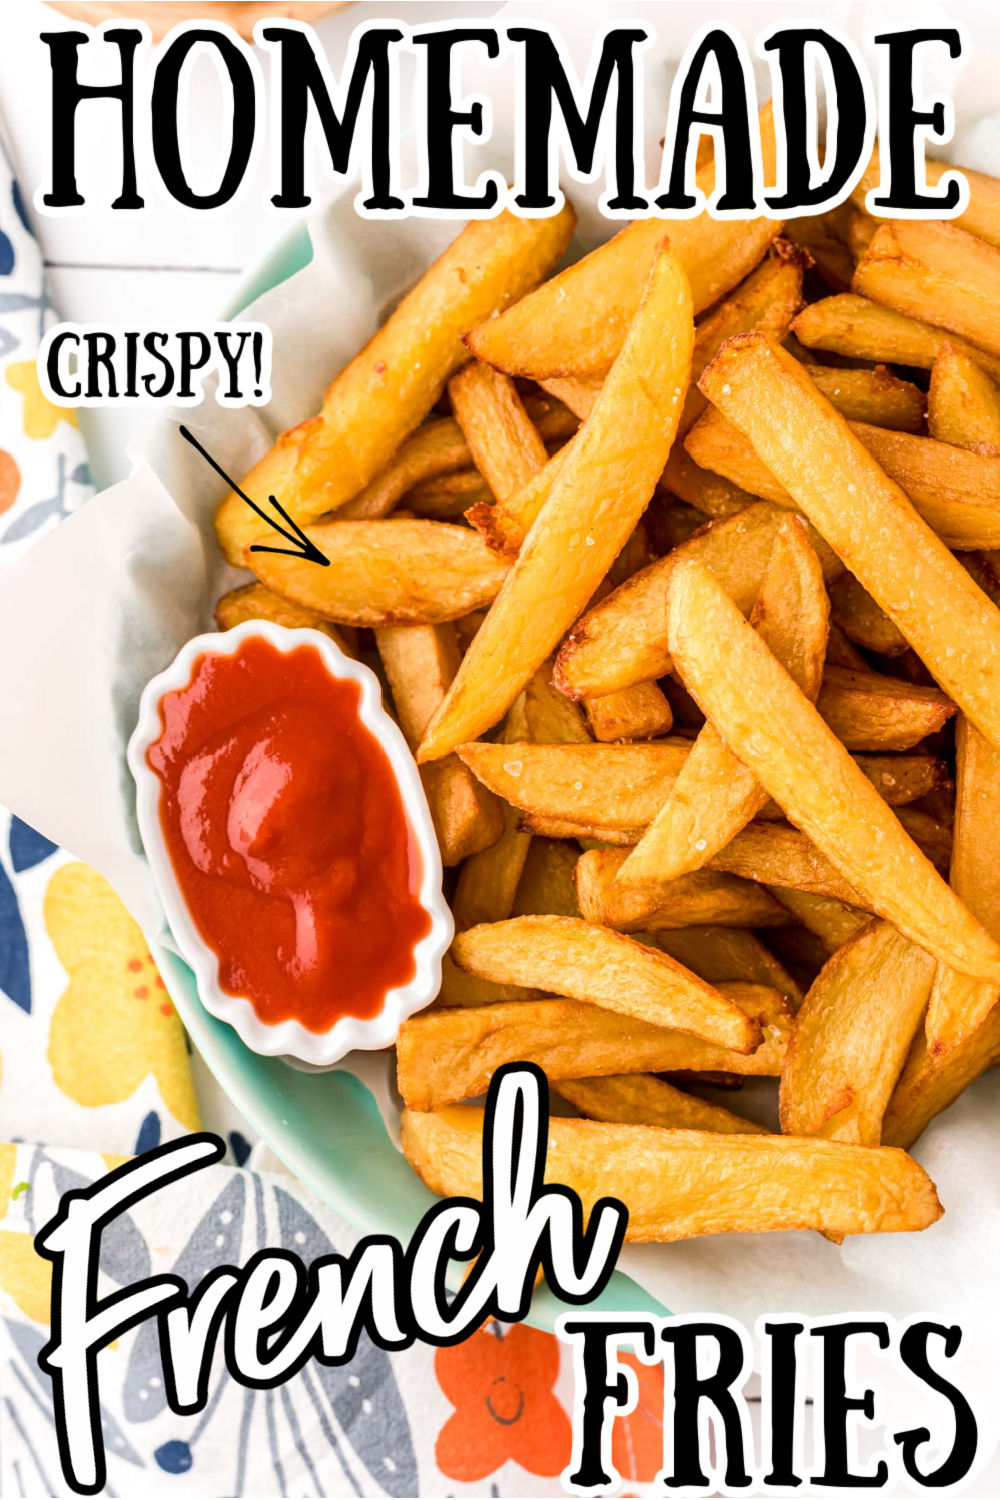 These Homemade French Fries hit your table in under 35 minutes after being double fried to a beautiful, crisp golden brown! Pair these crunchy french fries with your favorite burger, chicken tenders, or with a tasty slab of fried fish! via @sugarandsoulco